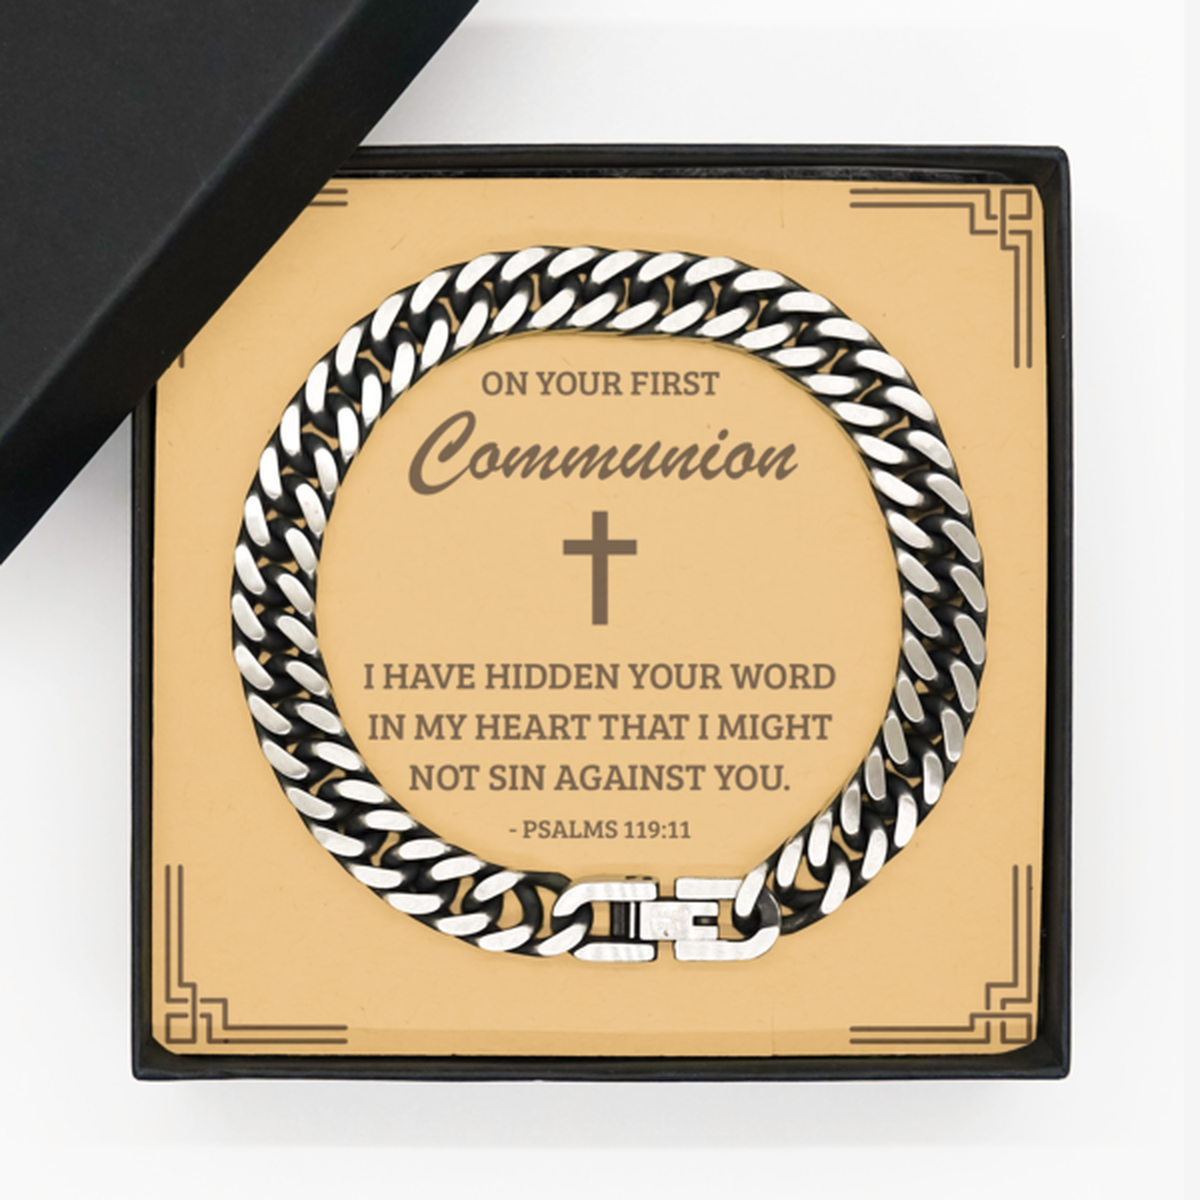 First Communion Gifts for Teenage Boys, I have hidden your word in my heart, Cuban Link Chain Bracelet with Bible Verse Message Card, Religious Catholic Bracelet for Son, Grandson, Dad, Godfather